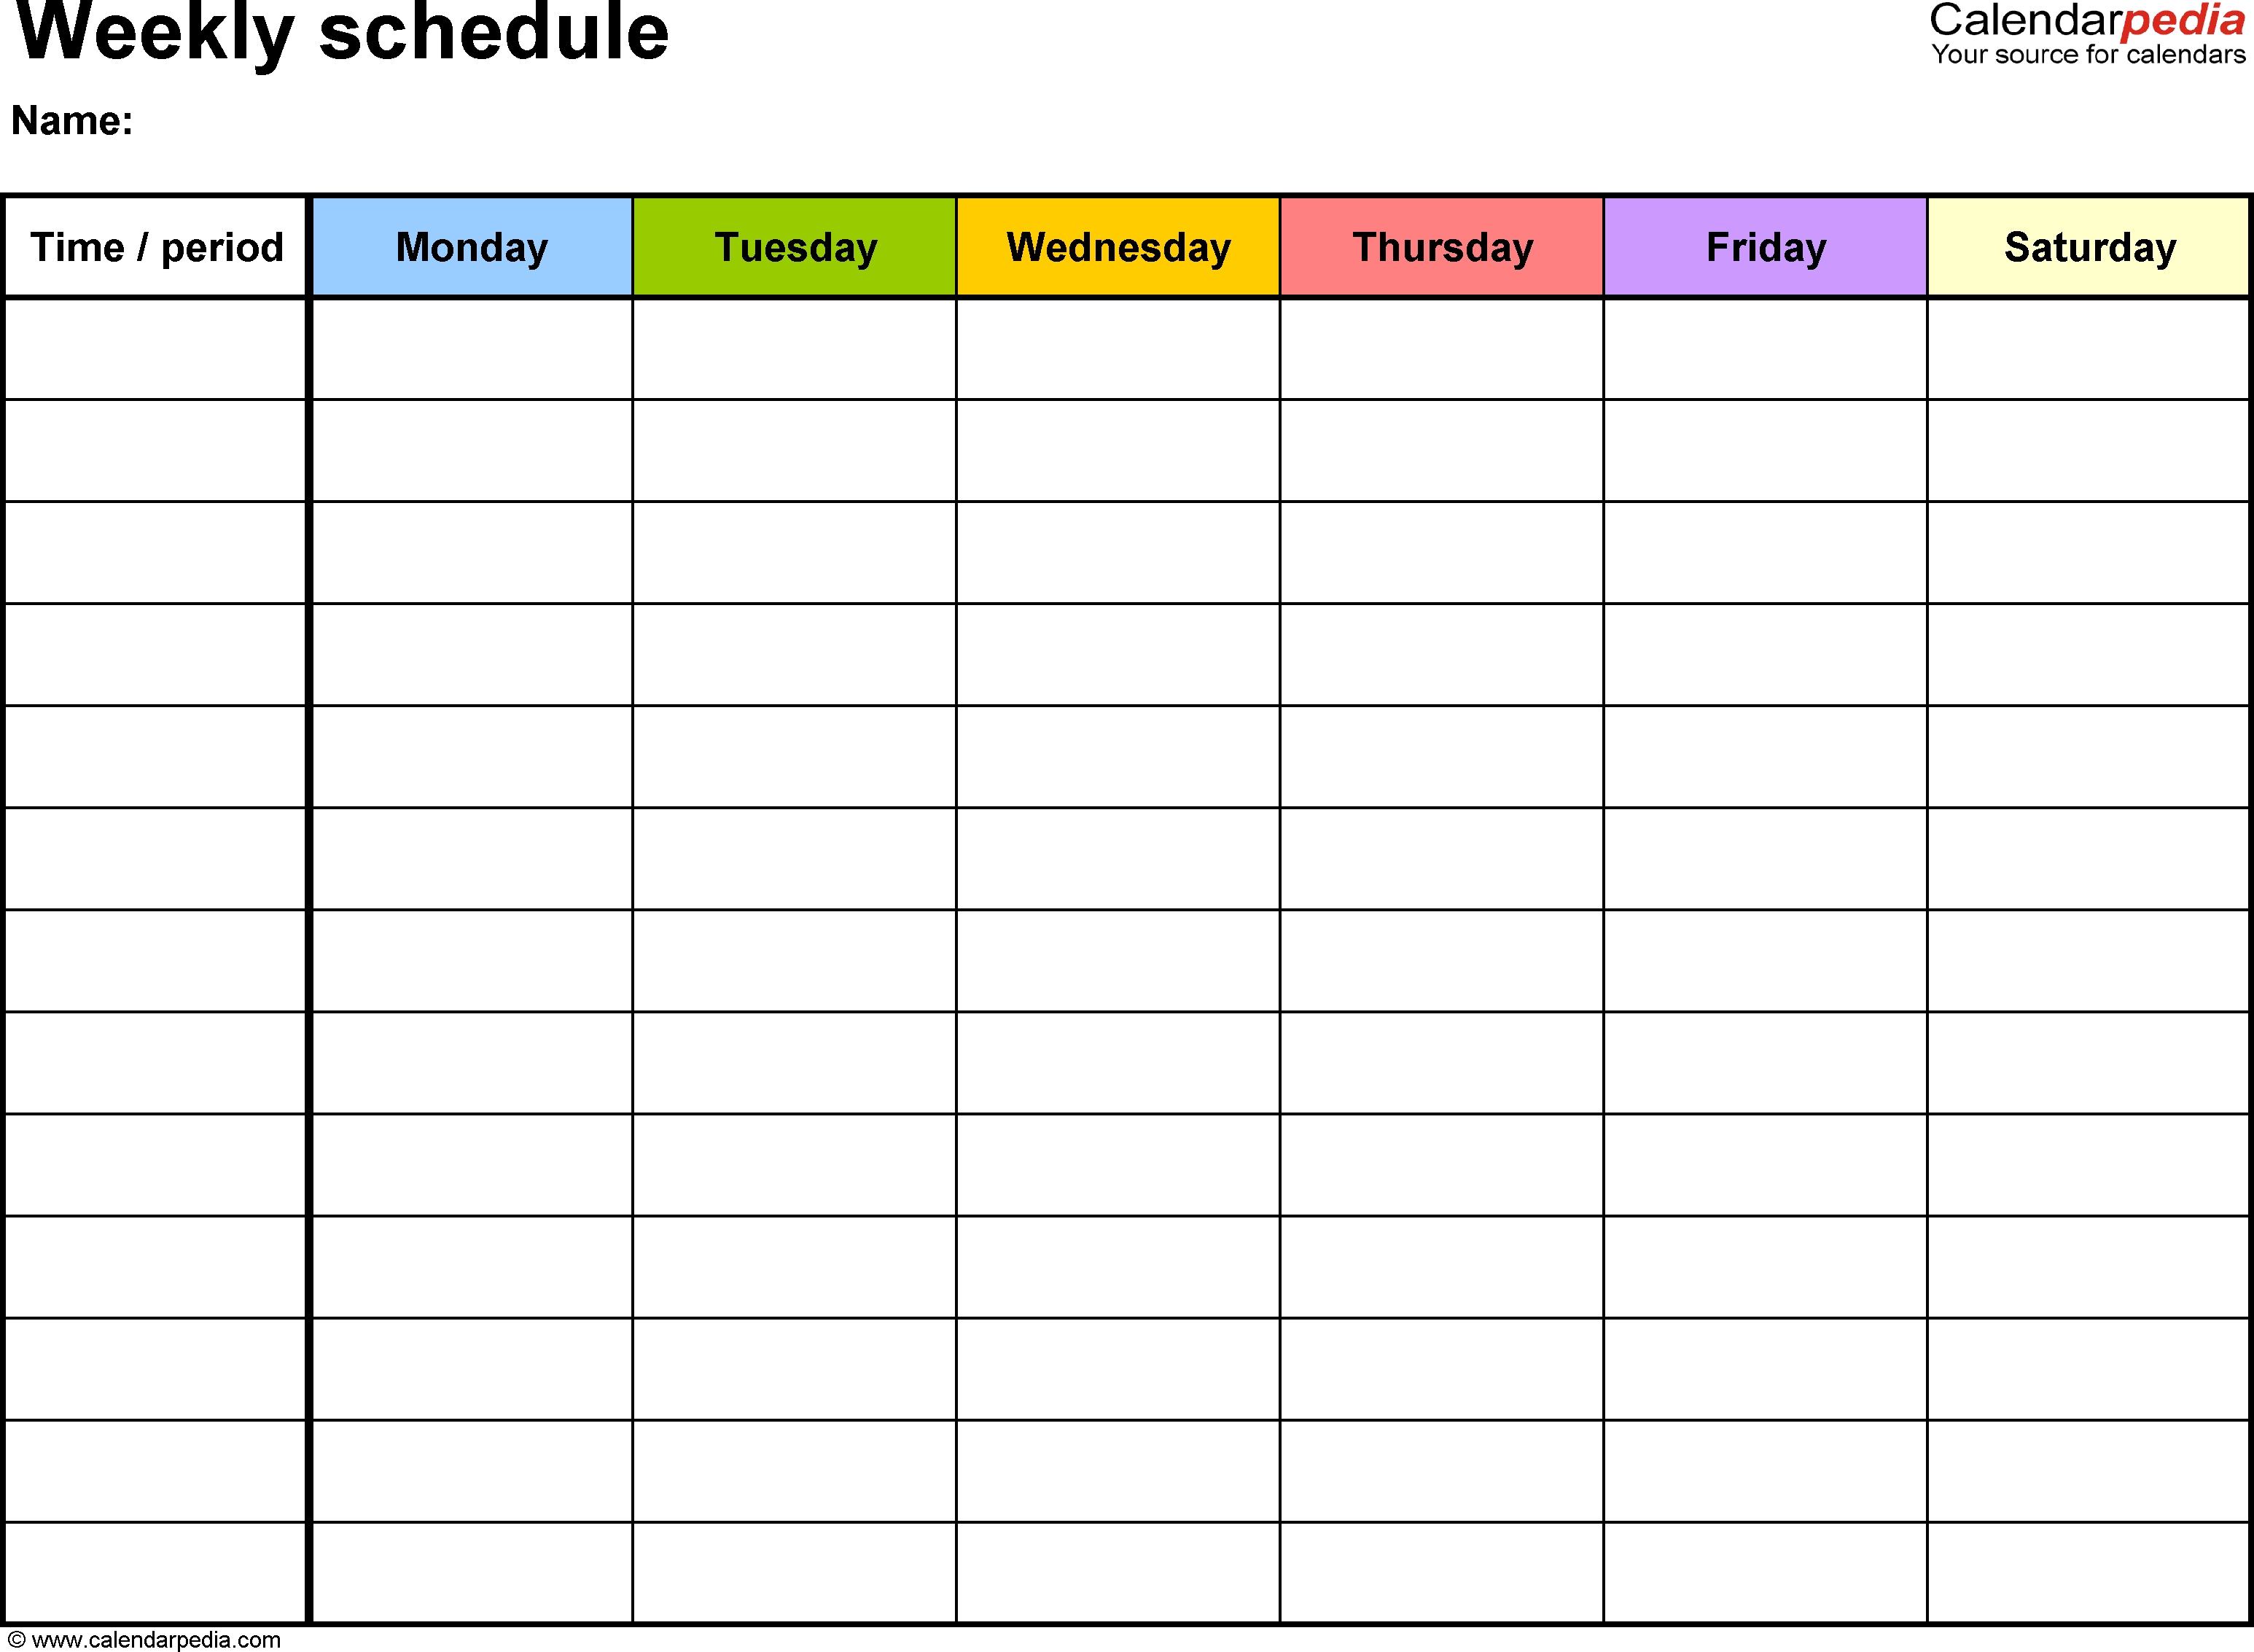 Free Weekly Schedule Templates For Word - 18 Templates M-F Weekly Calendar Template